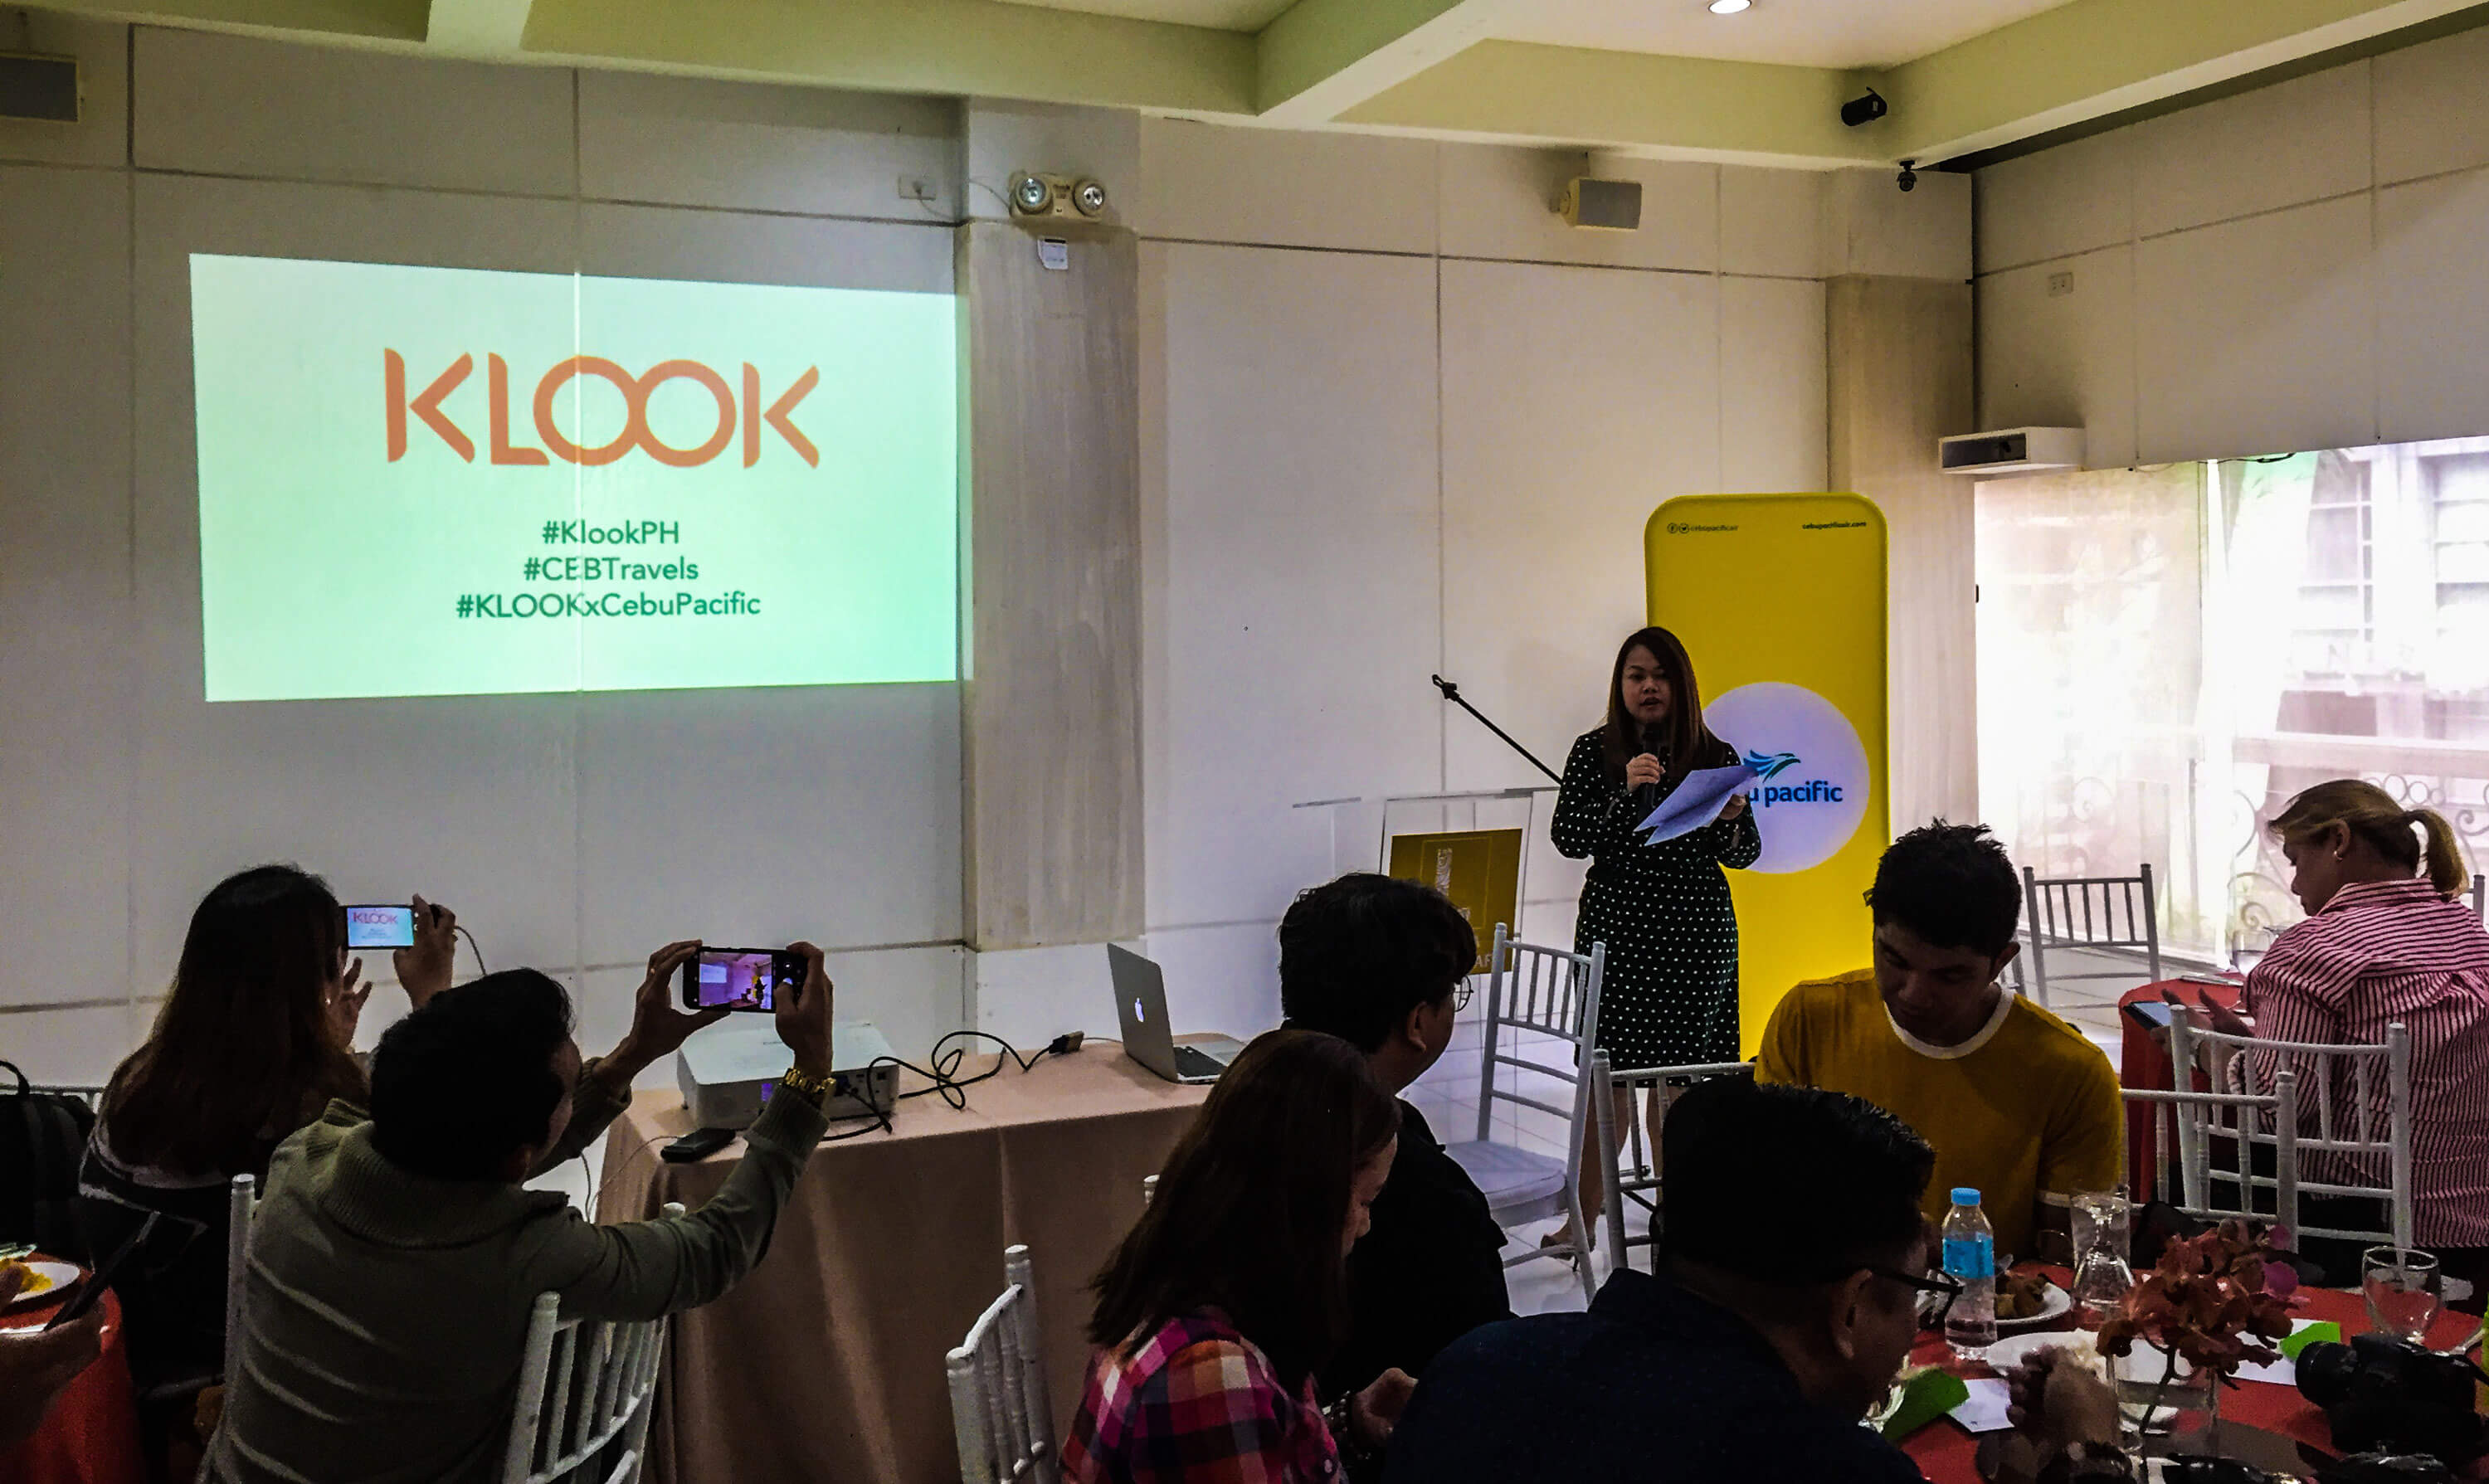 PRESSCON . Klook head of partnerships for the Philippines Blessie Cruz opens the press conference to announce the Klook Travel Fest 2019.